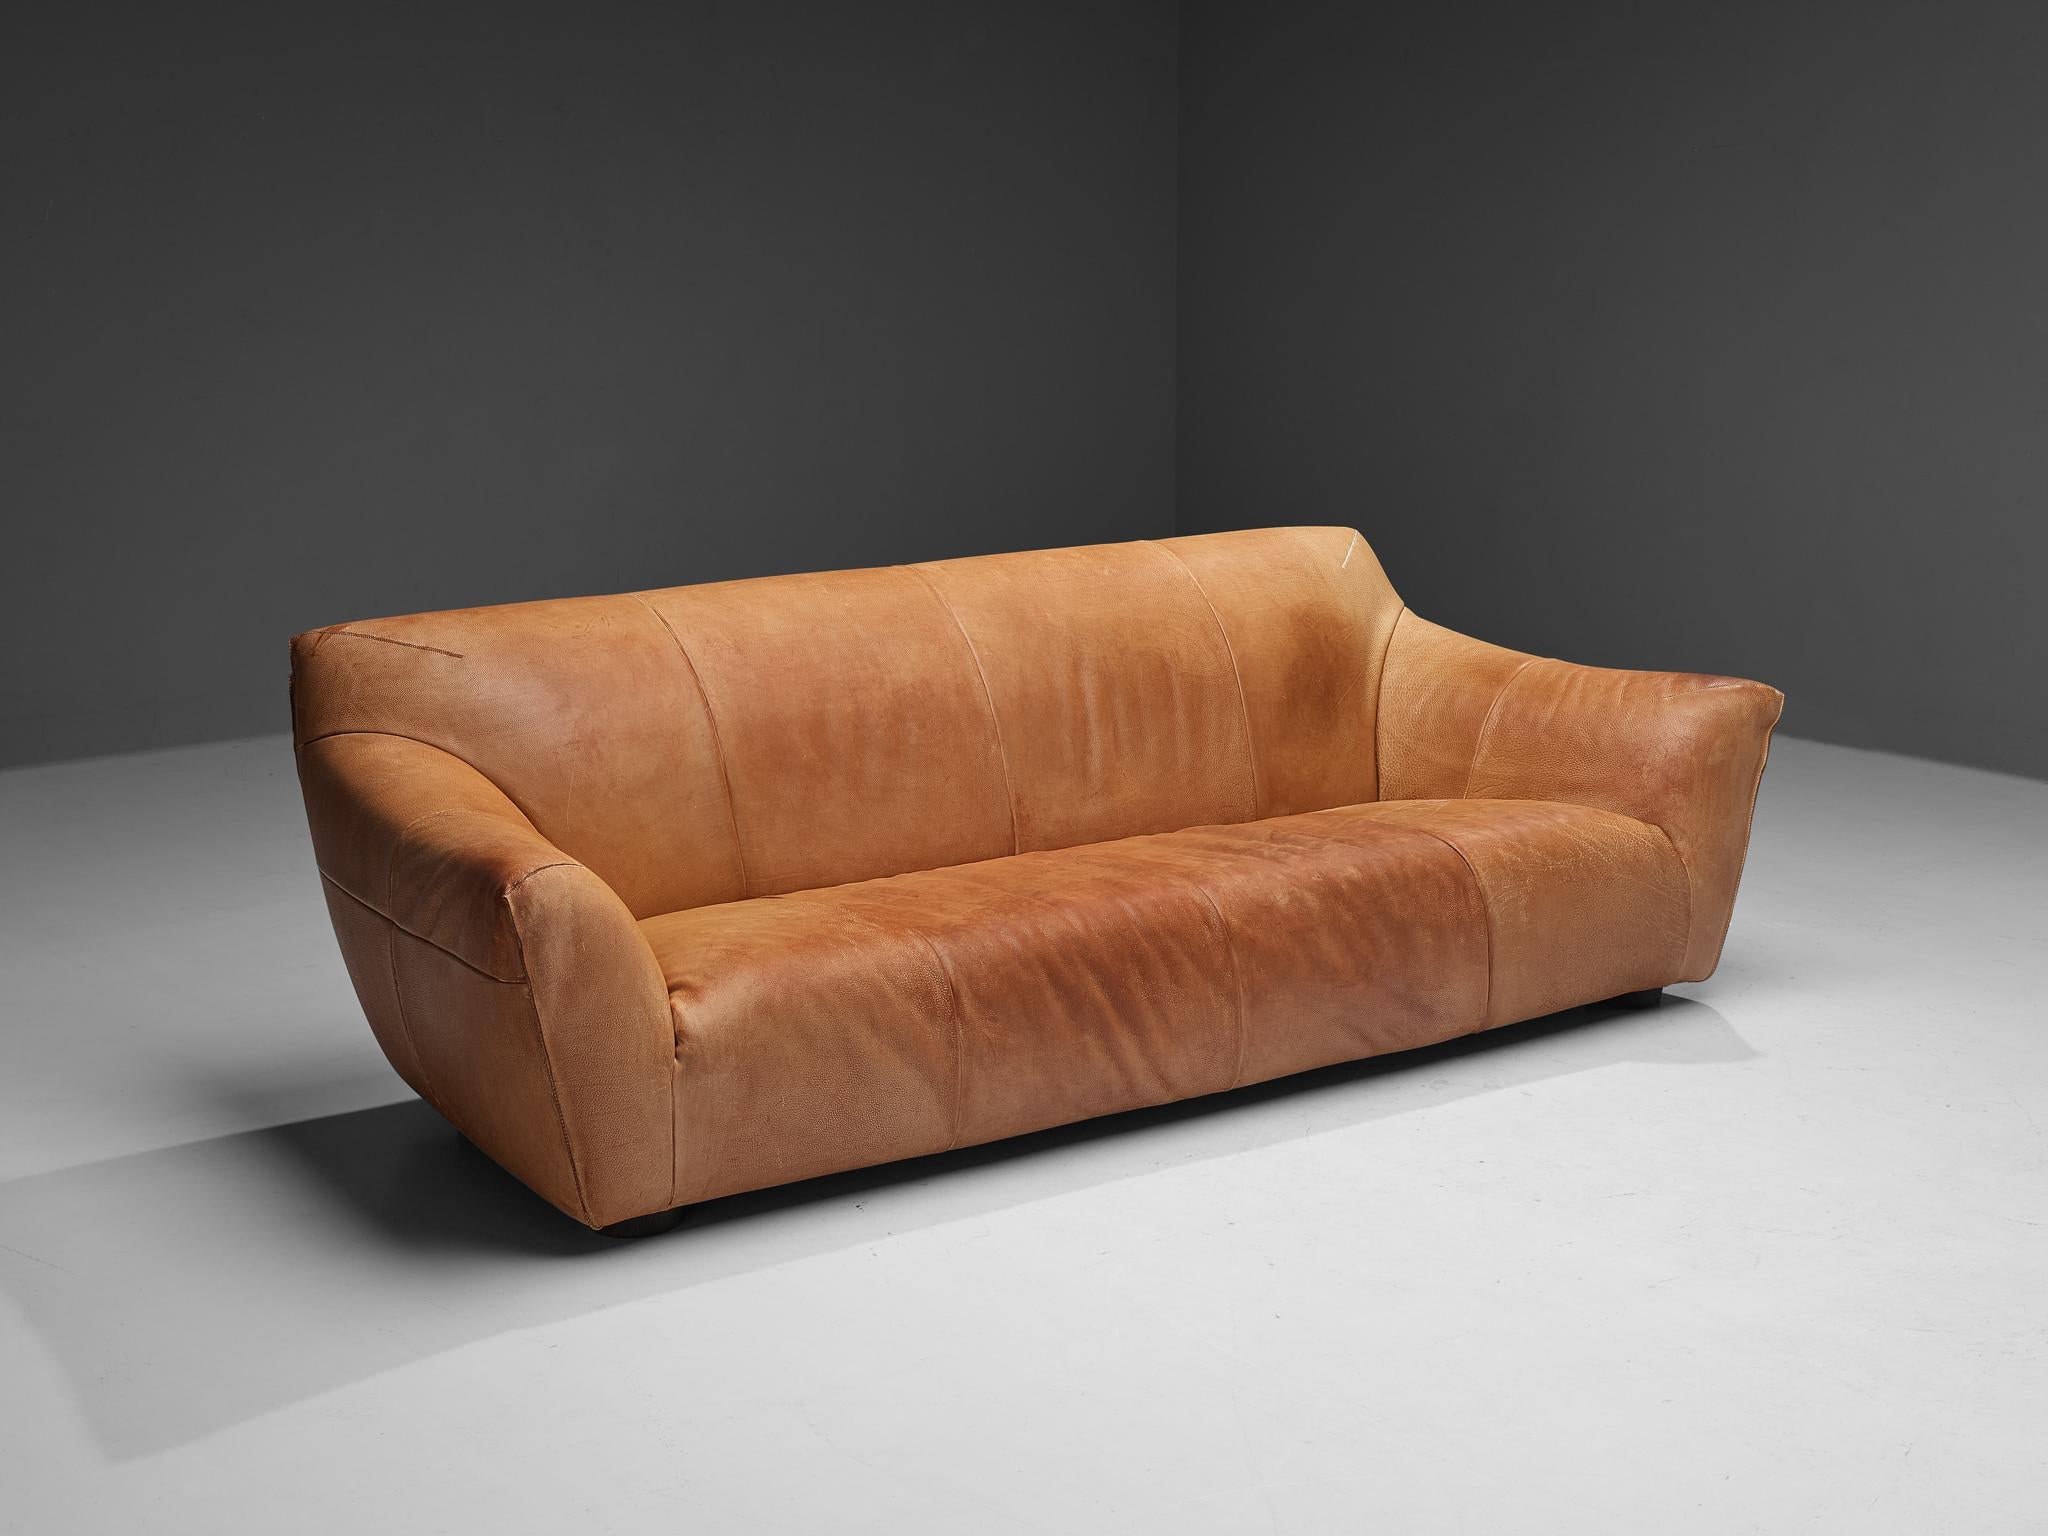 Gerard van den Berg for Label, sofa model 'Mancha', leather, The Netherlands, 1990s. 

This bulky three-seat 'Mancha' sofa is designed by the Dutch designer Gerard Van Den Berg. The sofa is comfortable and shaped as a large cushion, and also